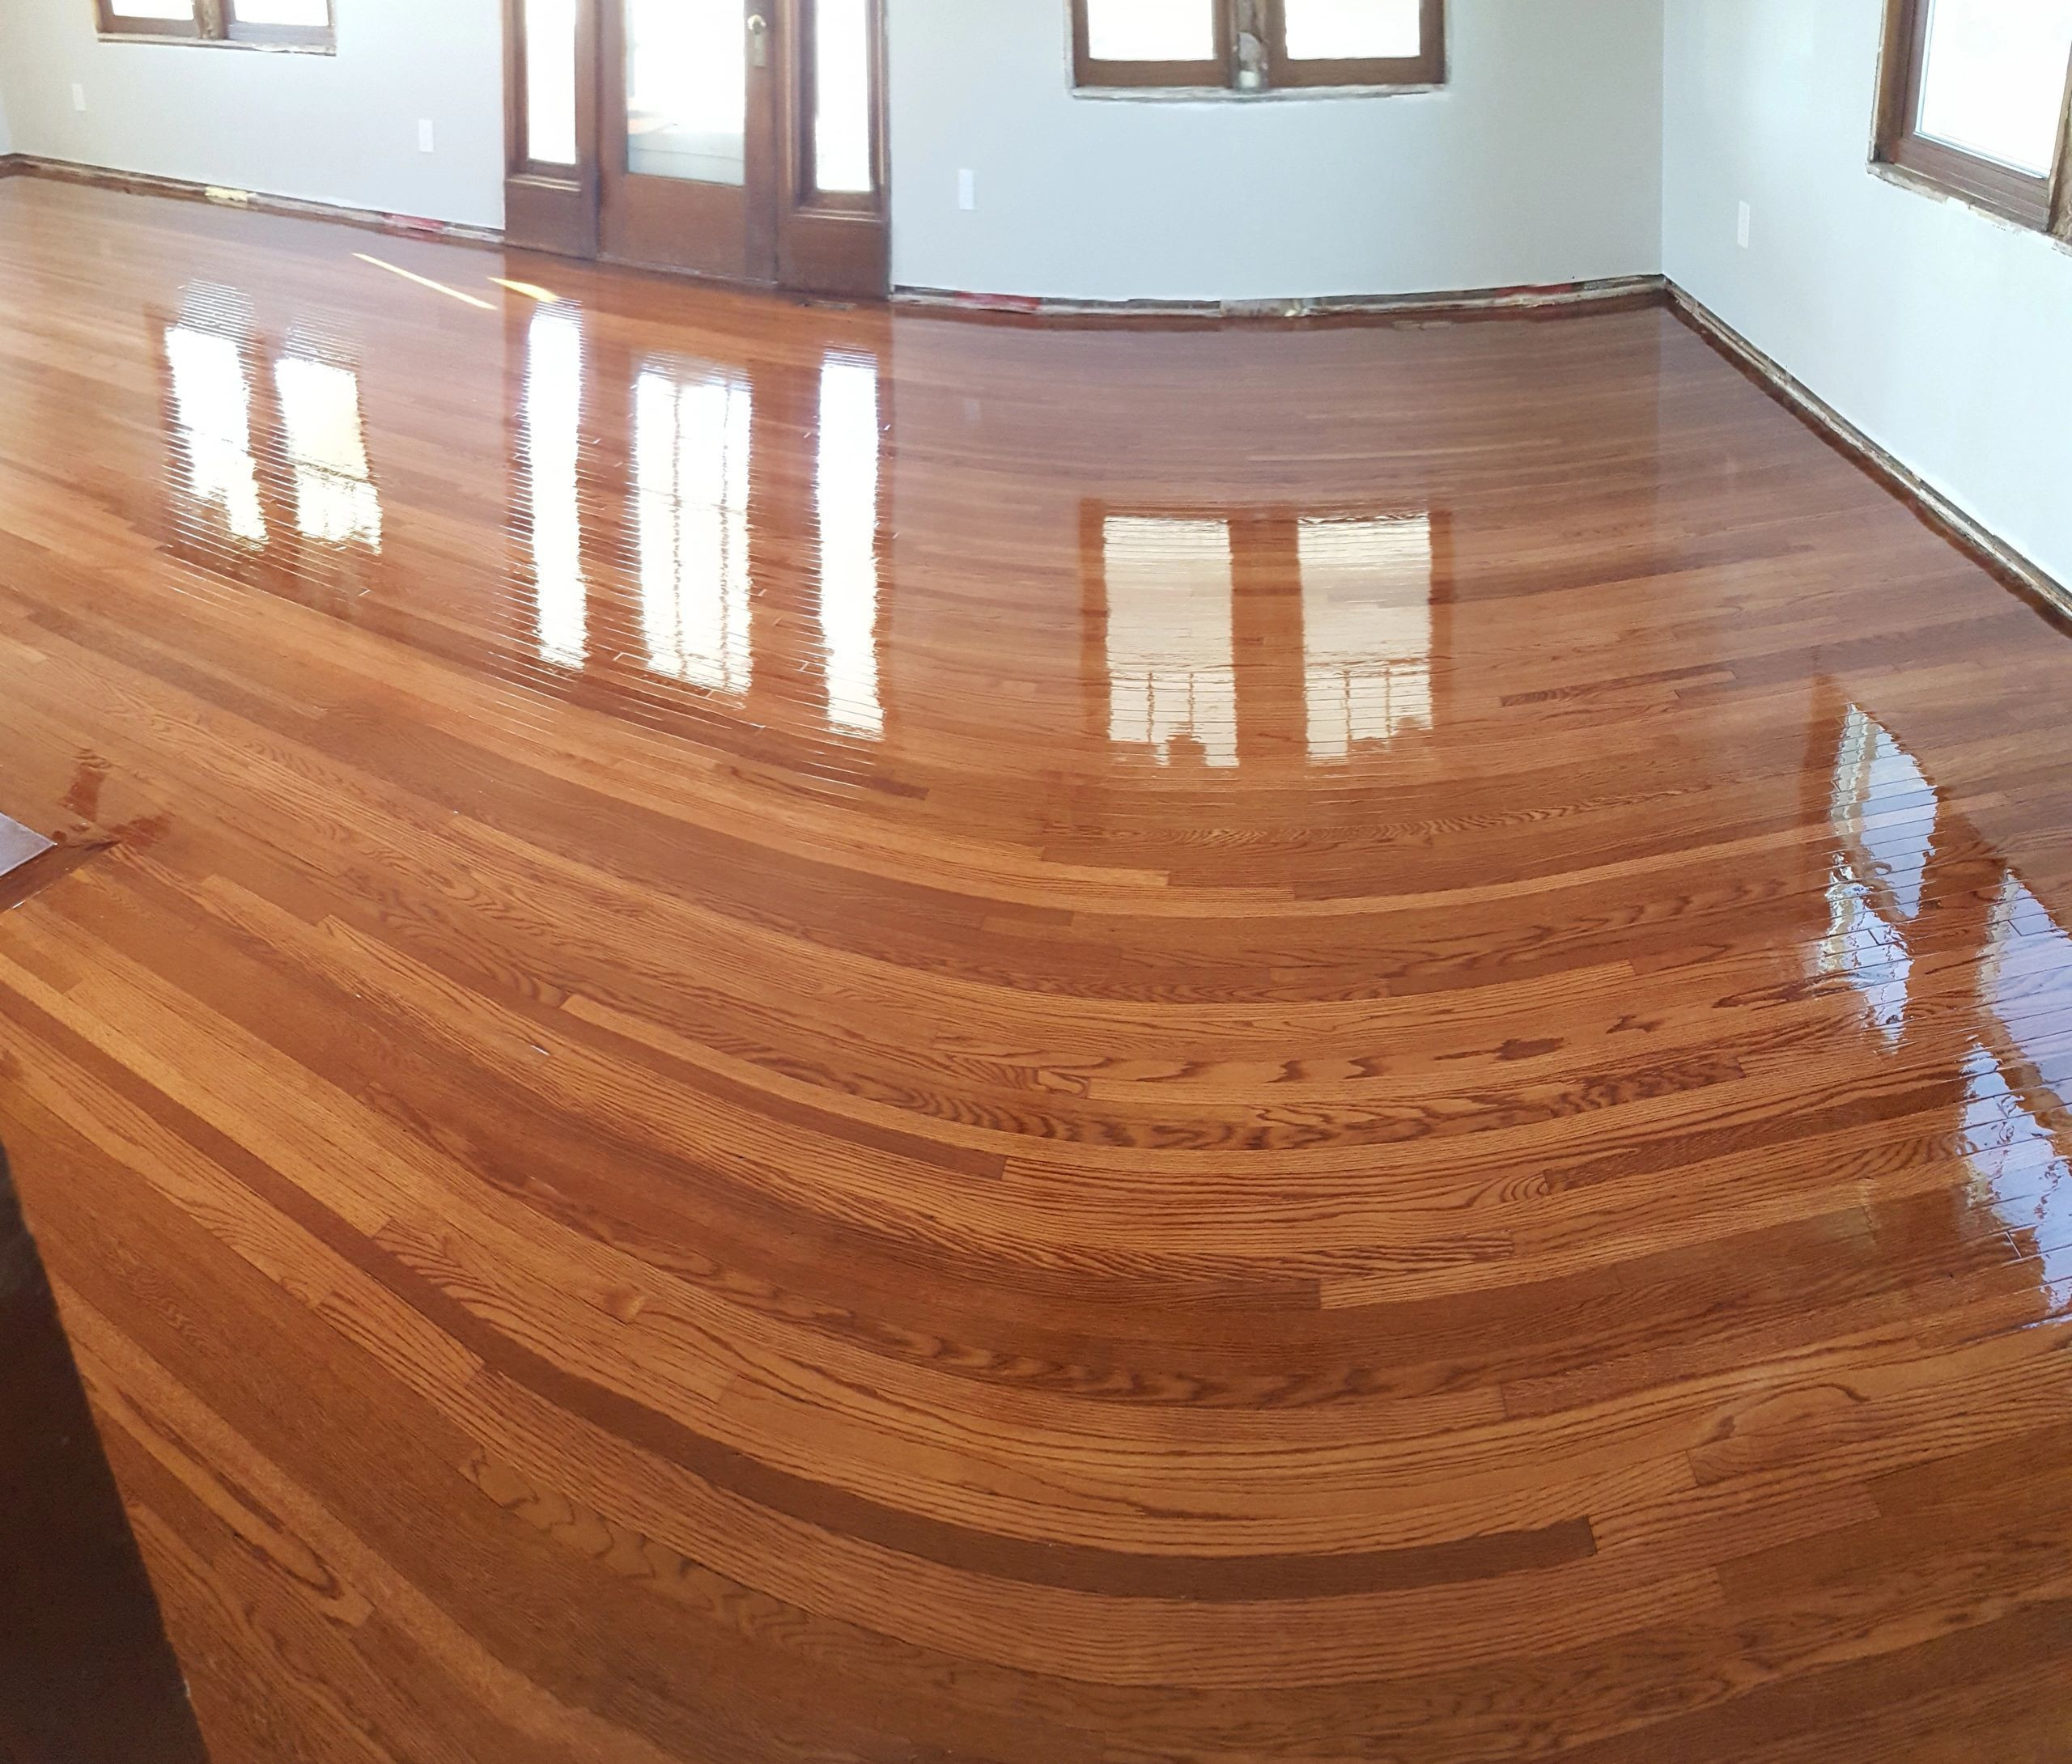 21 Unique Hardwood Floor Refinishing 2024 free download hardwood floor refinishing of hardwood floor refinishing floor plan ideas intended for adams refinishing serving all of central illinois with the highest quality longest lasting floor refini